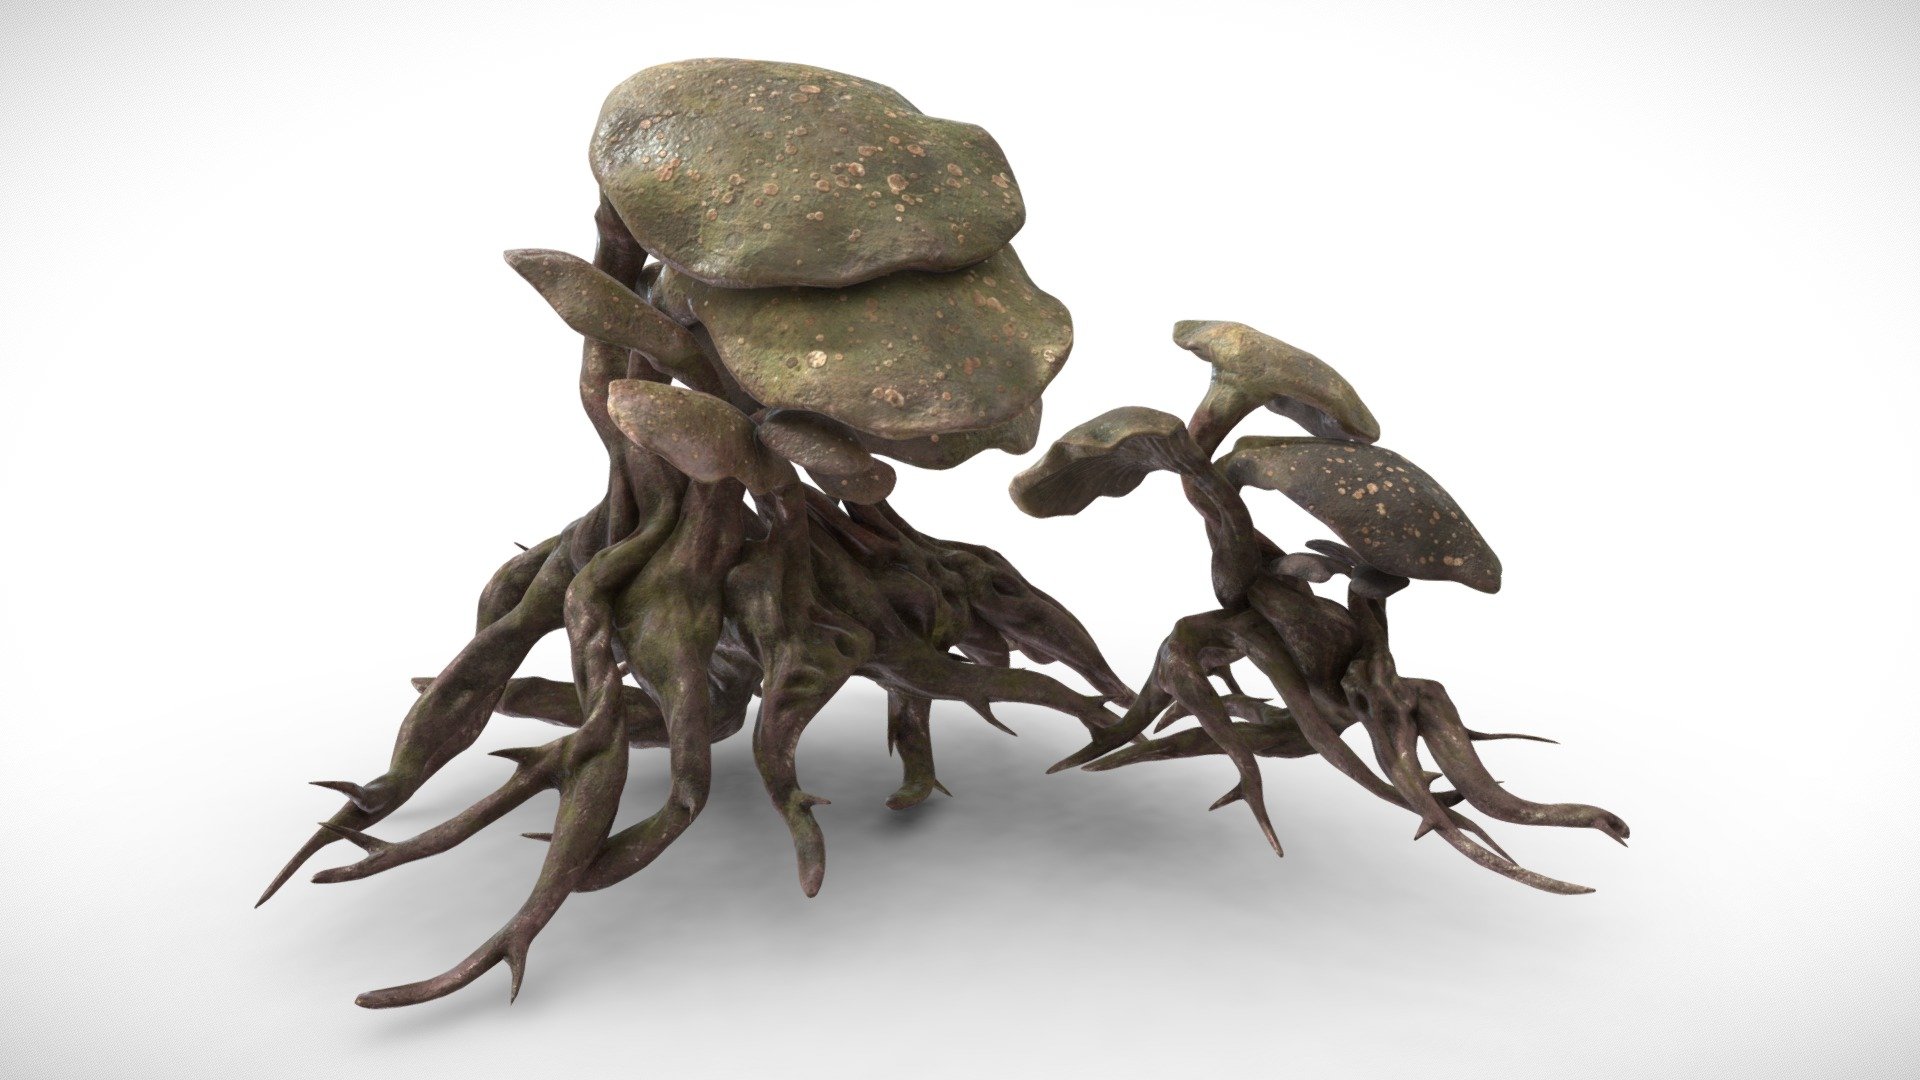 Comes with several 4096x4096 Textures, and two model variations.

Textures are:
* Diffuse
* Roughness
* Metallic
* Normal - Alien Plant Fantasy Mushroom #1 - Buy Royalty Free 3D model by Davis3D 3d model